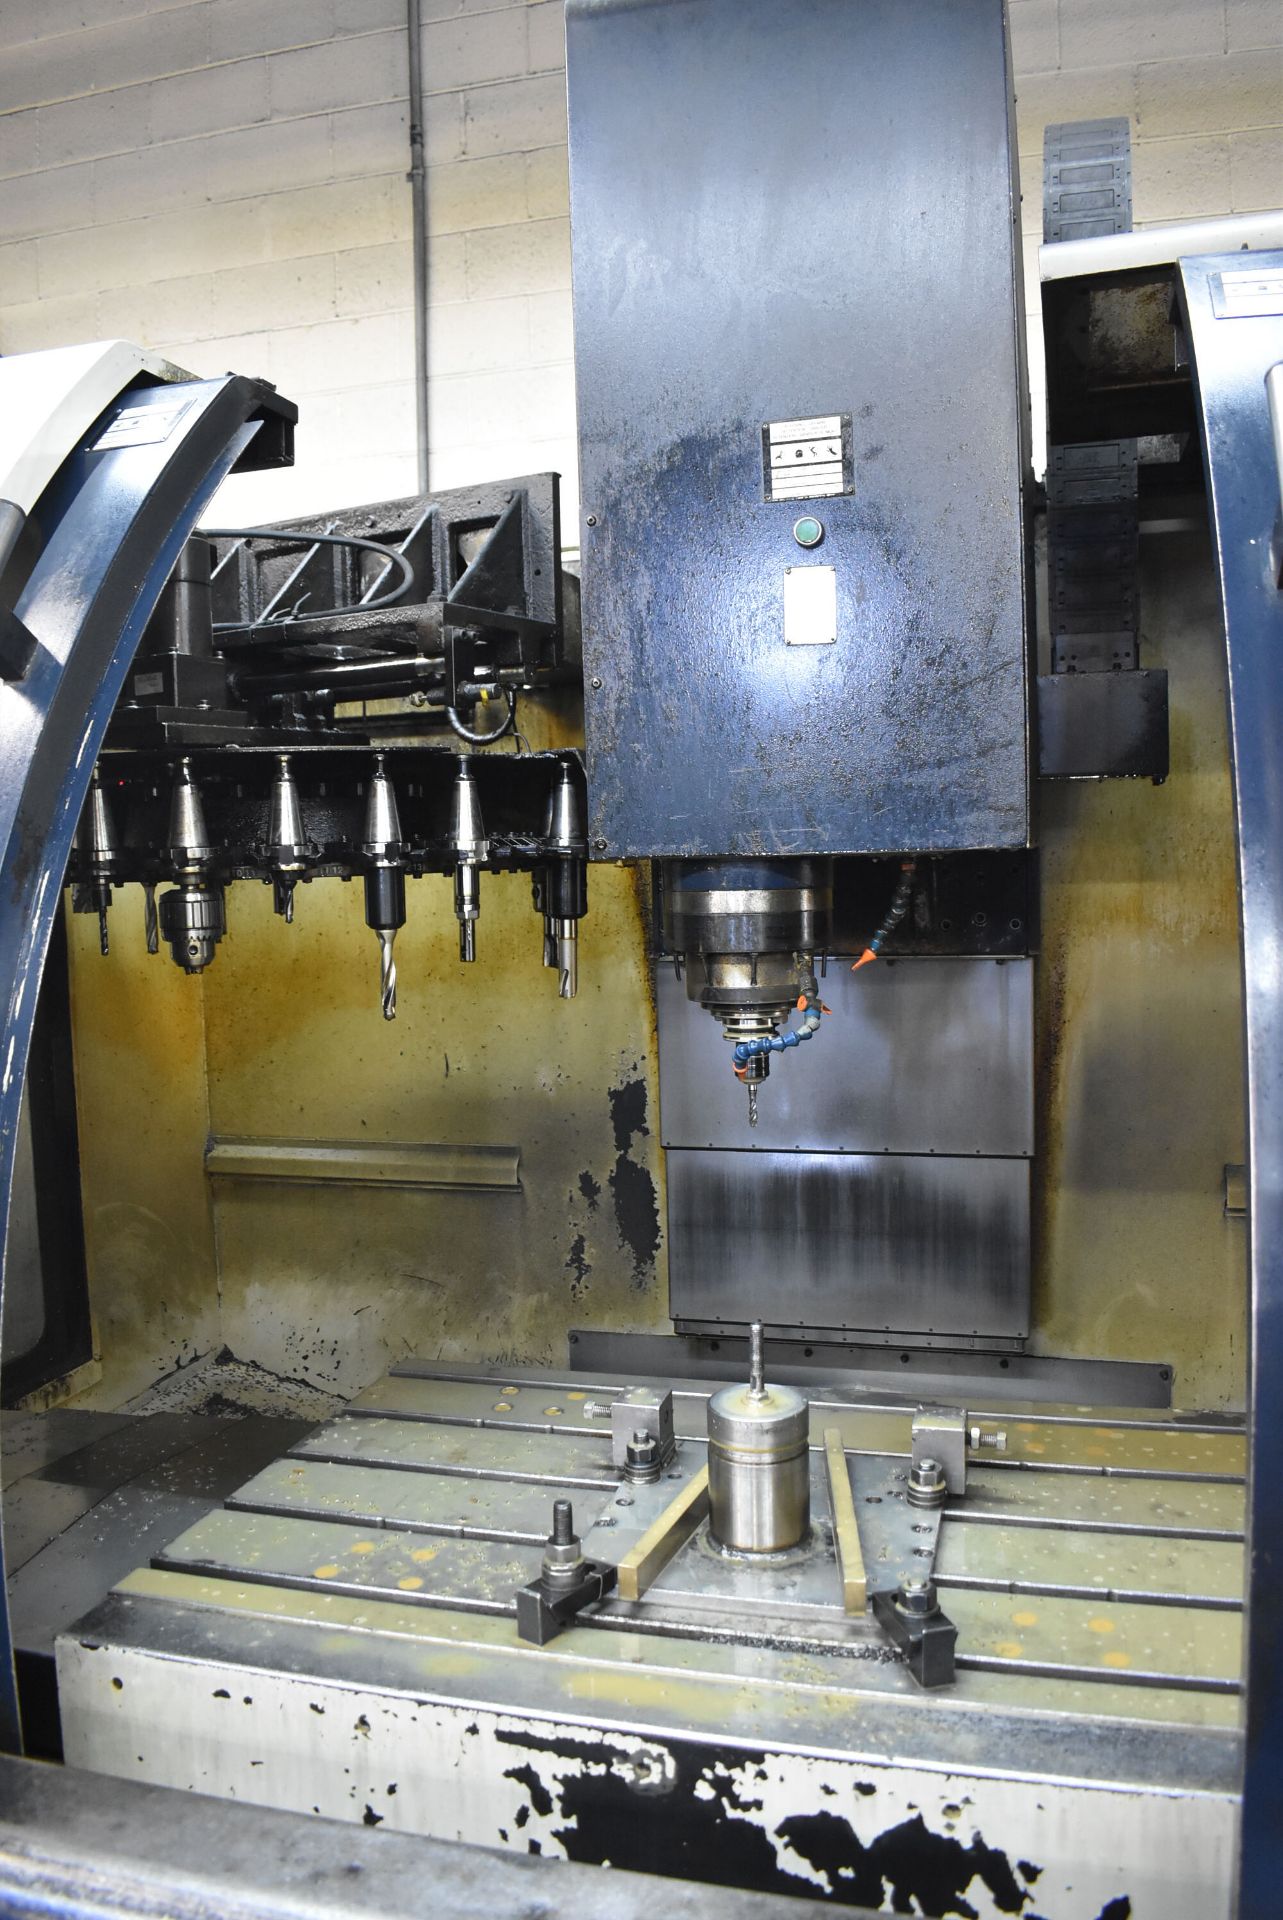 SPINNER VC-810 CNC VERTICAL MACHINING CENTER WITH SIEMENS SINUMERIK CNC CONTROL, 24" X 39" T-SLOT - Image 4 of 7